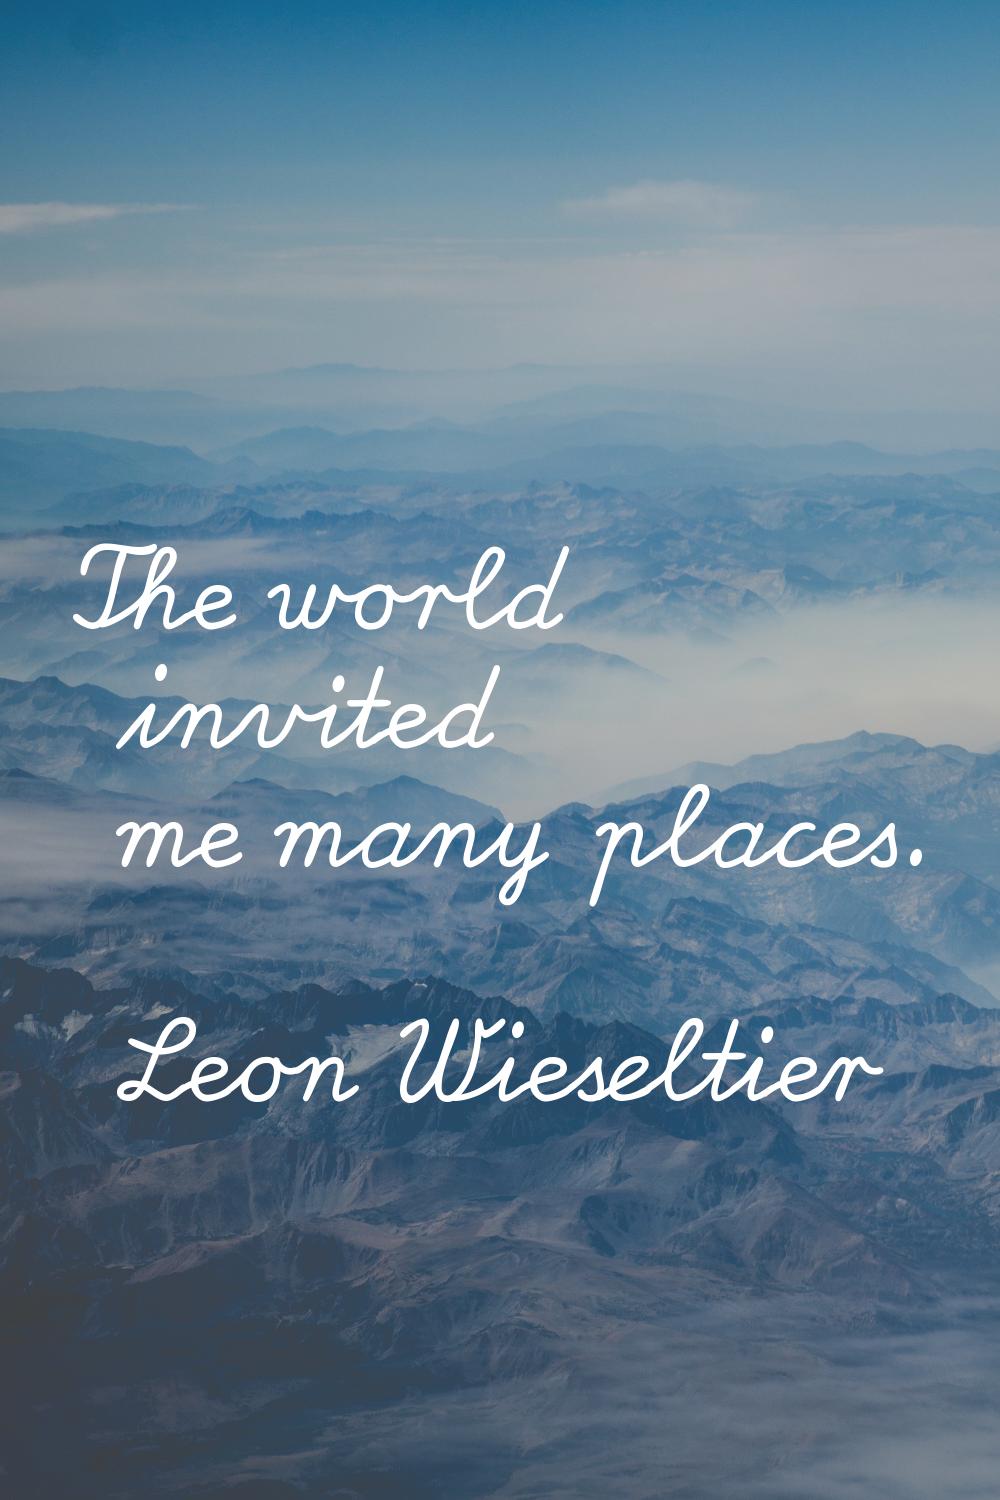 The world invited me many places.